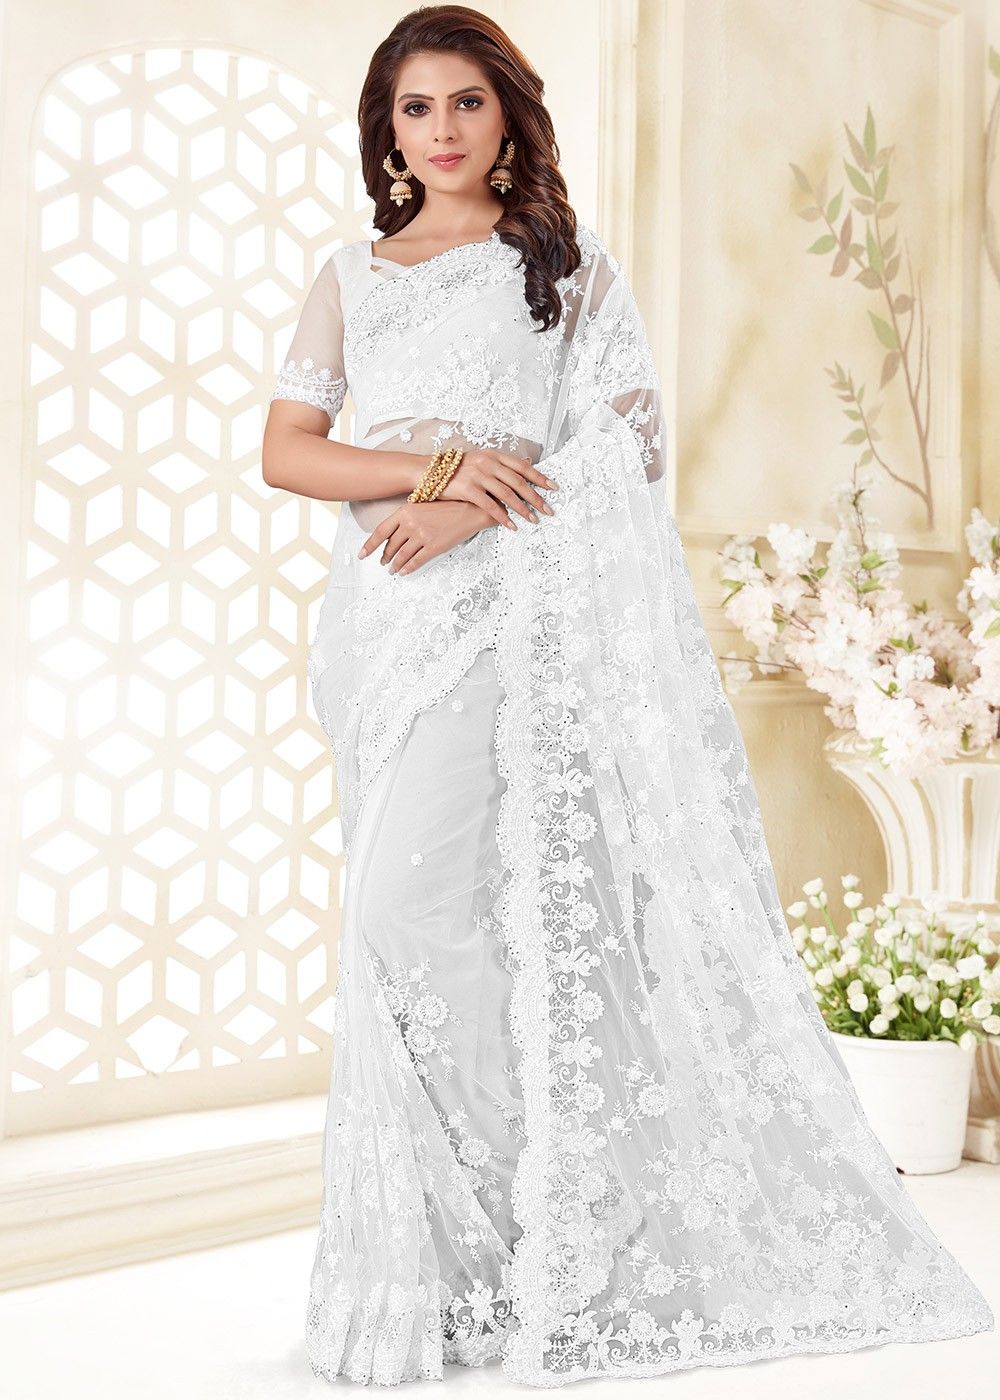 The Real Beauty: 3 Keerthy Suresh's Traditional White Saree Looks Are Here-sgquangbinhtourist.com.vn